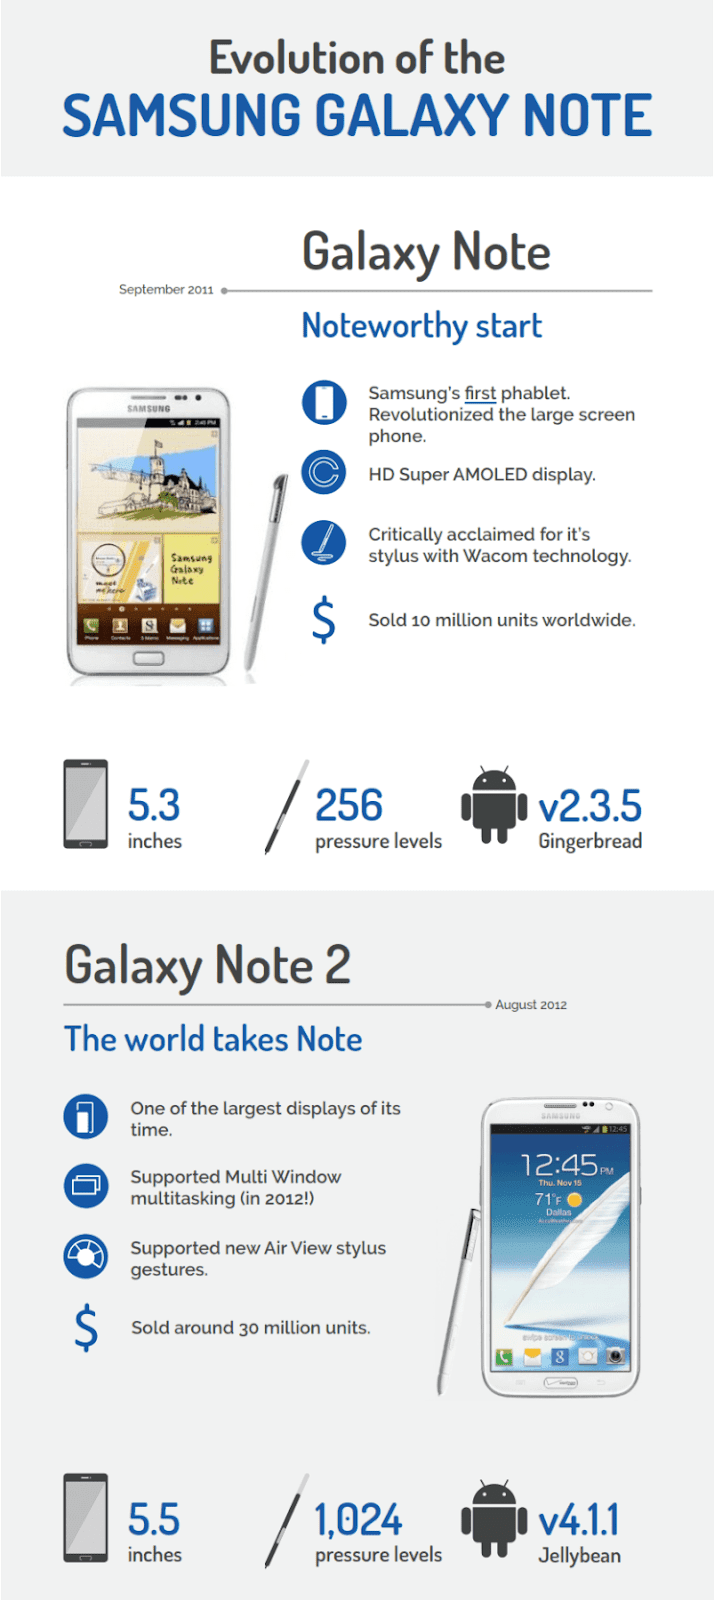 Evolution of the Samsung Galaxy Note 1 and 2